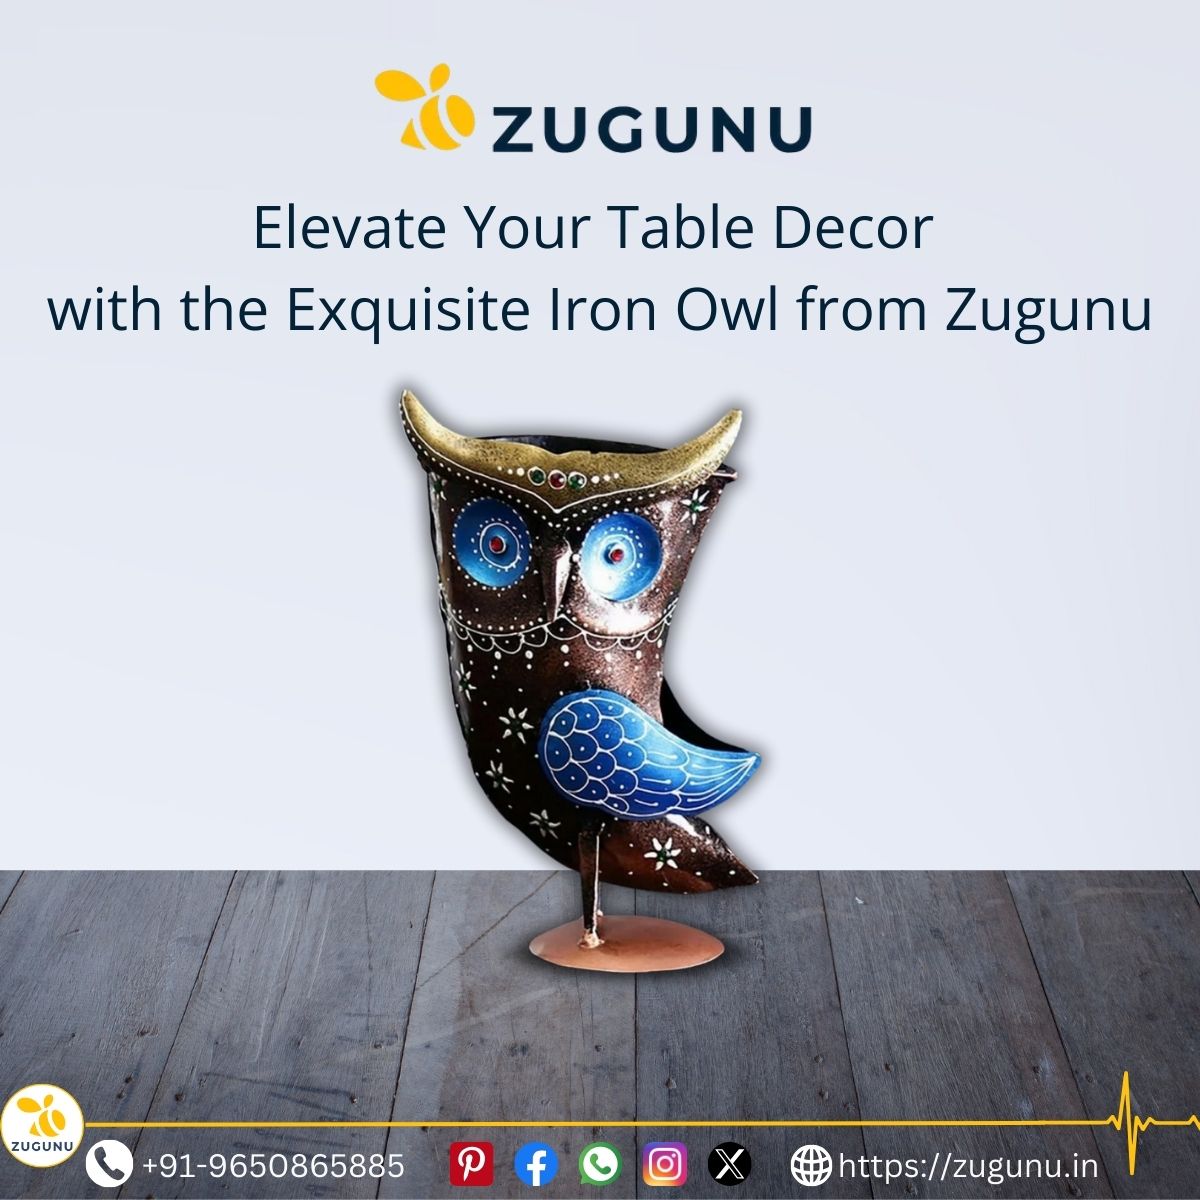 Discover Exquisite Table Decor at Zugunu for Every Occasion